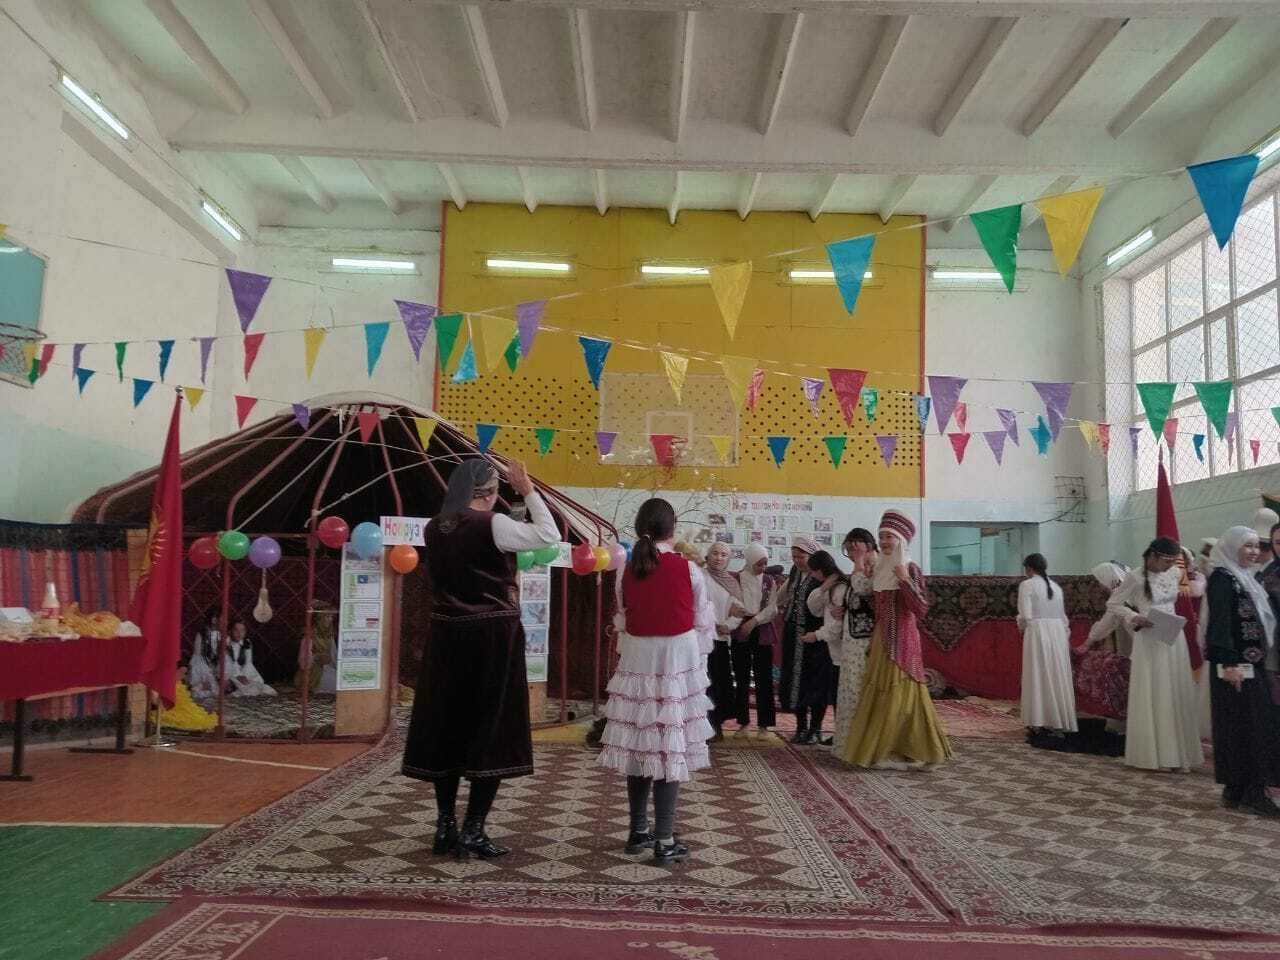 women in traditional Kyrgyz clothes on rugs in a gym. also a yurt structure (without the felt) set up